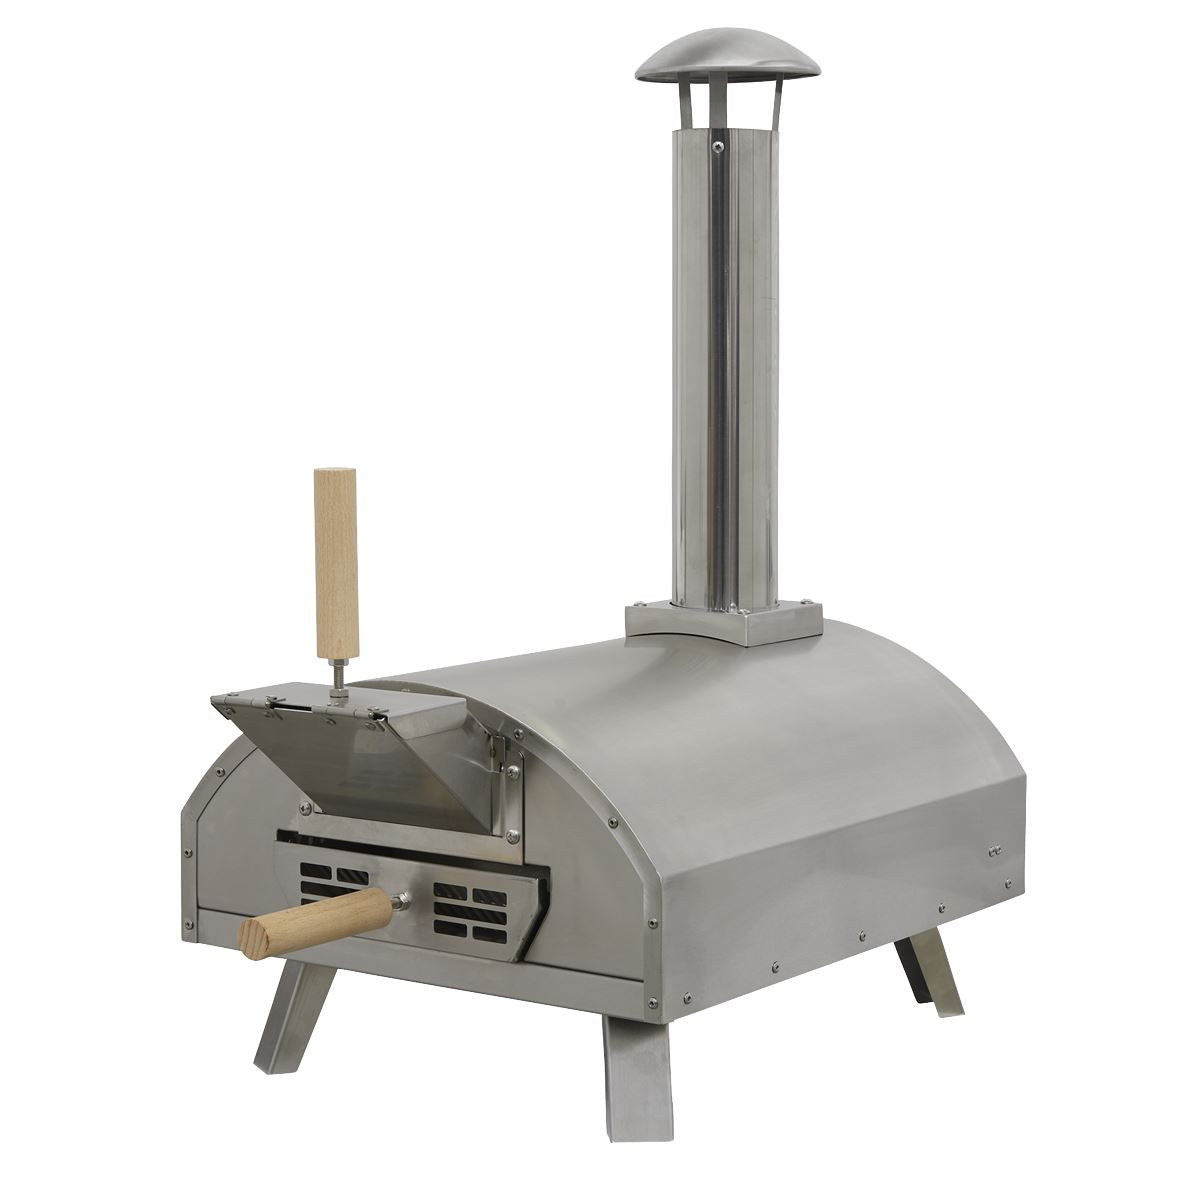 Dellonda 14" Portable Wood-Fired Pizza & Smoking Oven - Stainless Steel